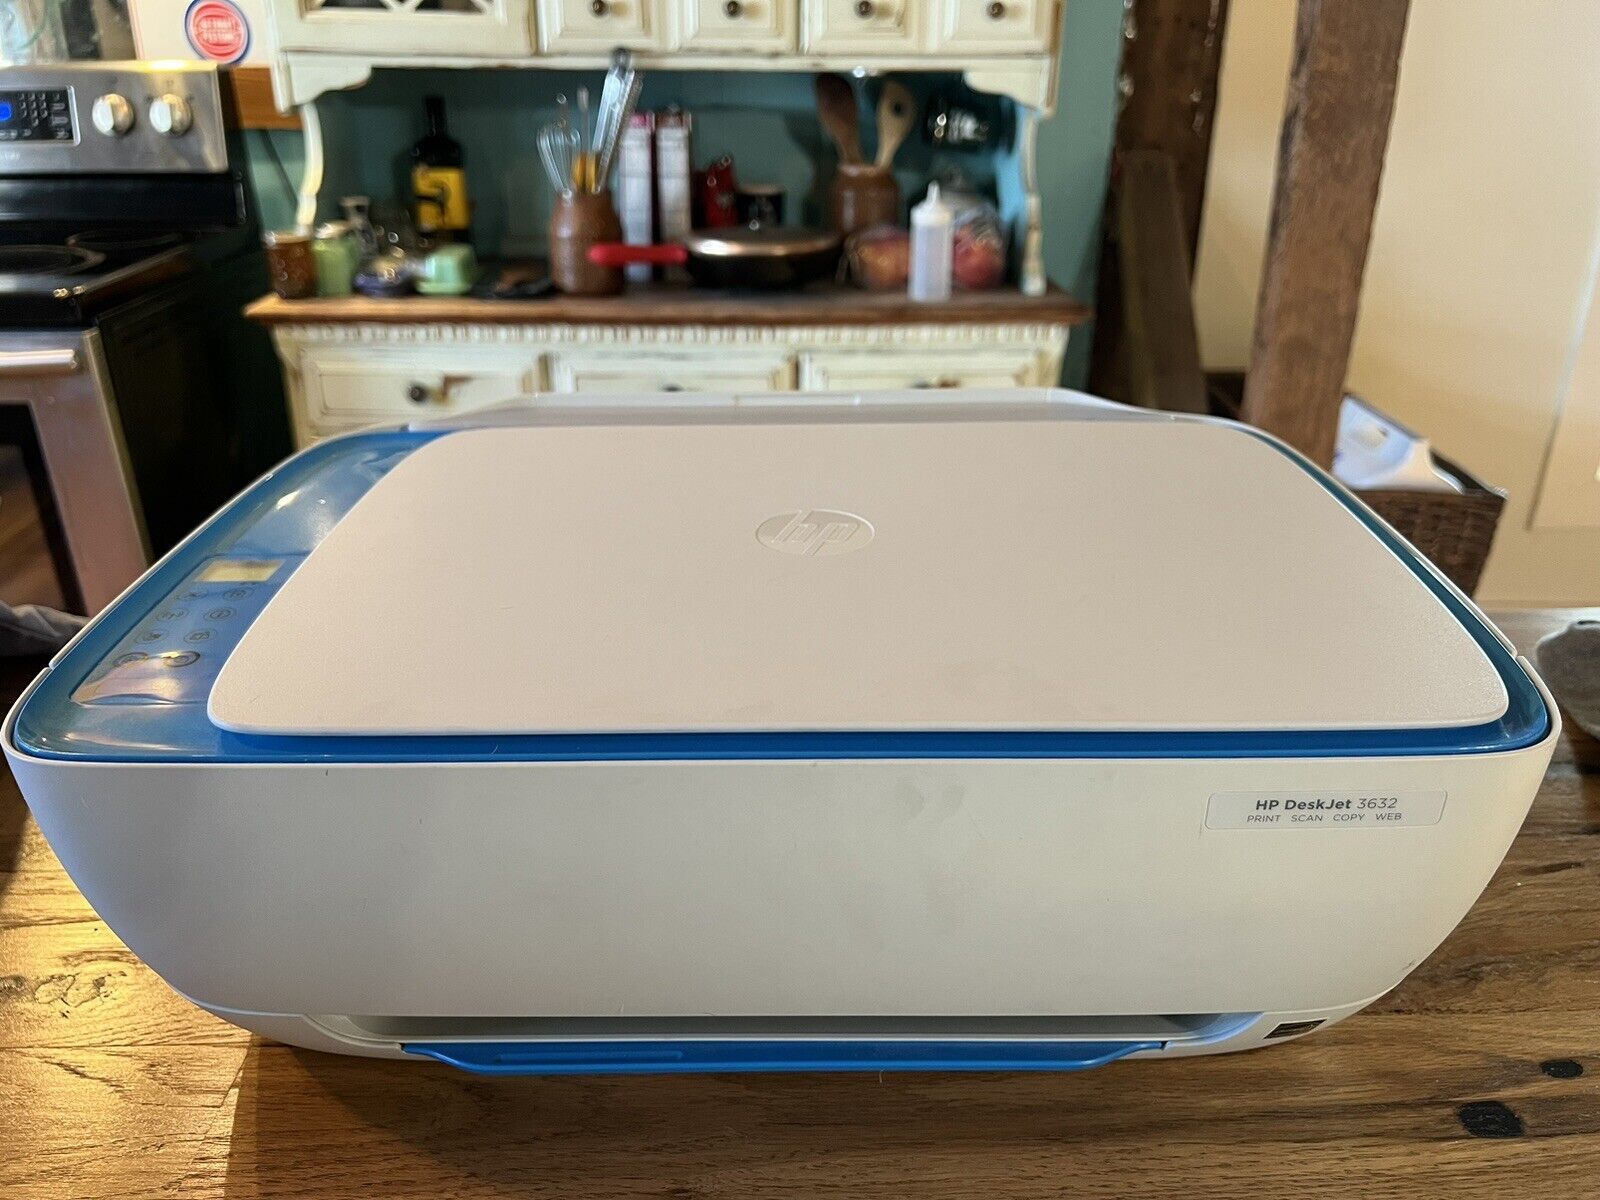 wireless-printing-connecting-hp-deskjet-3632-to-iphone-10